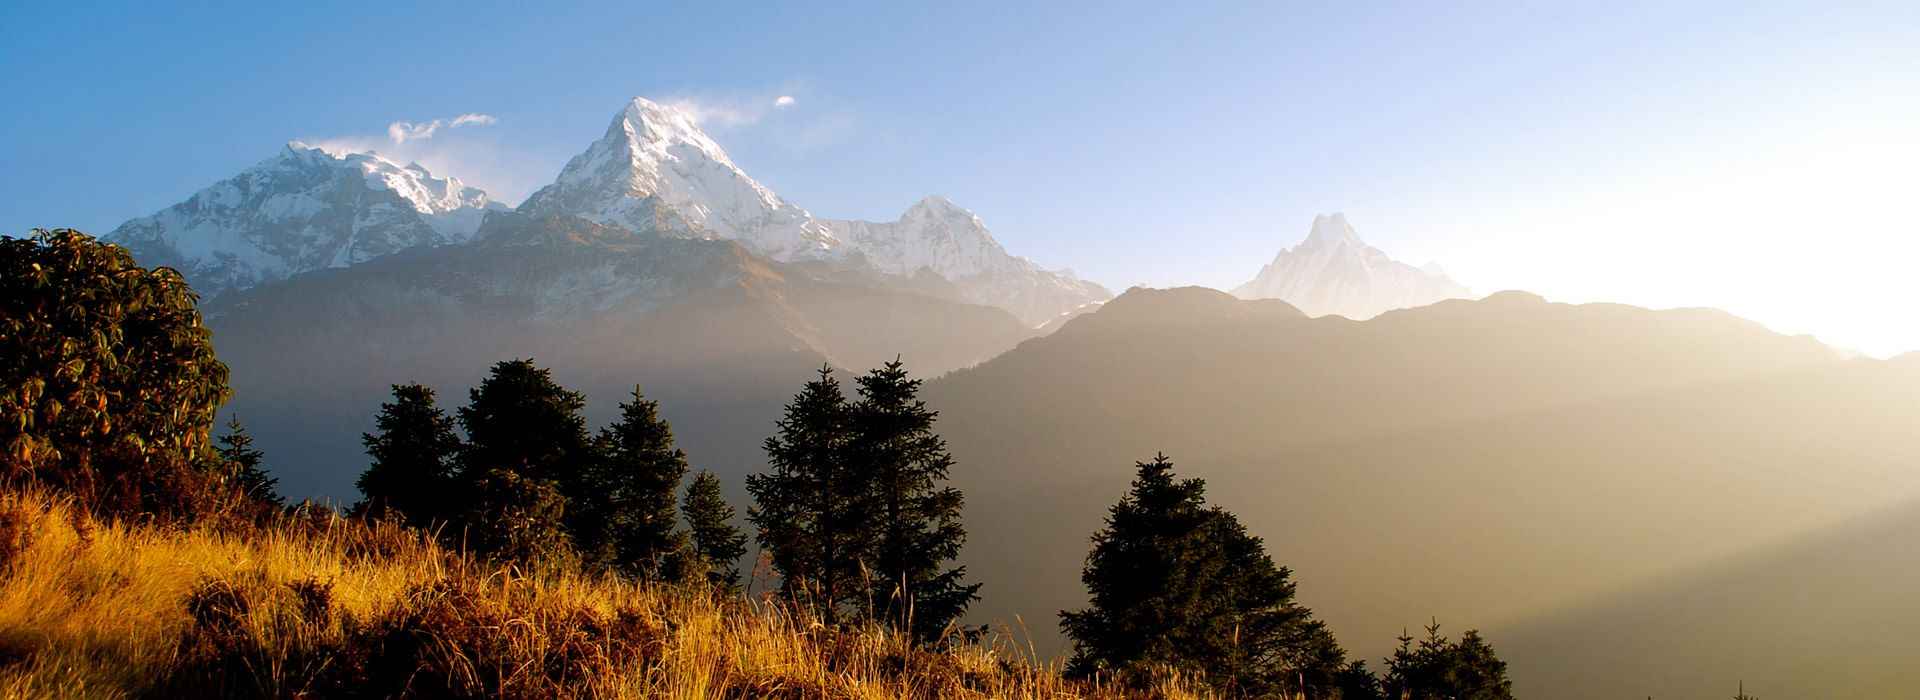 Nepal Travel Guide – Travel Insights and Tips